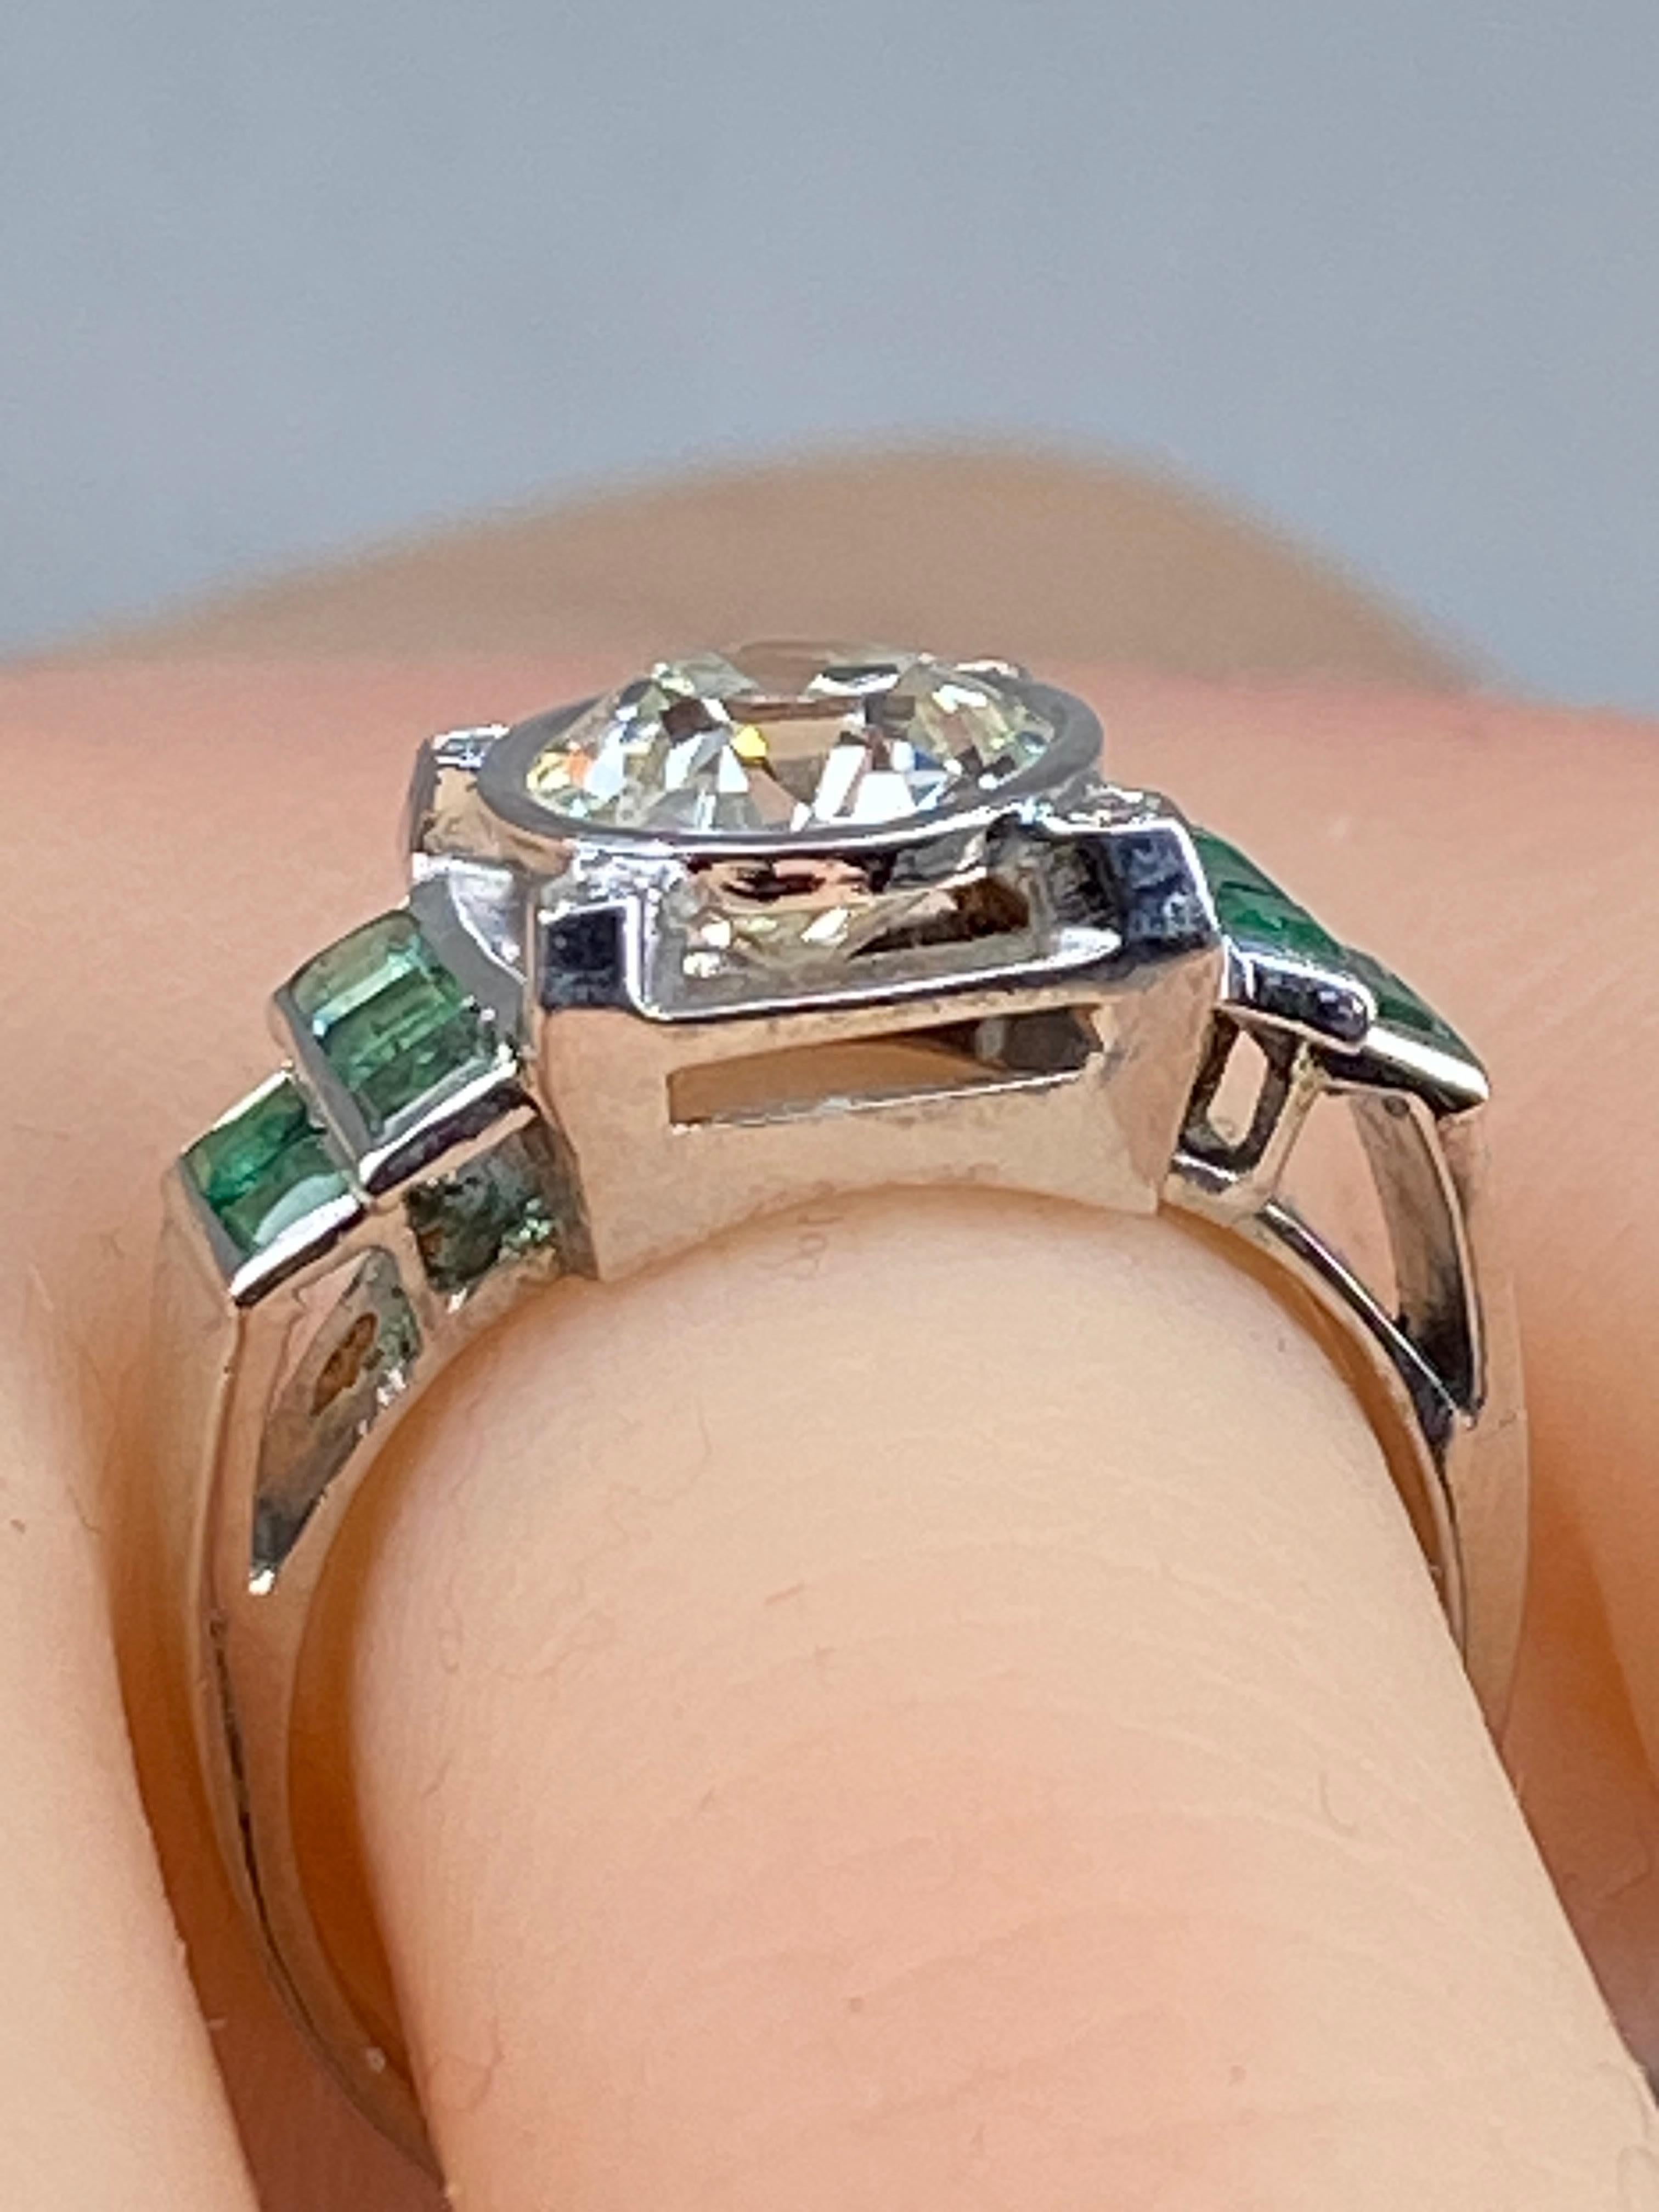 Platinium Engagement Ring Set with a 1.55 Carat Diamond Backed by Emeralds, 1900 For Sale 10